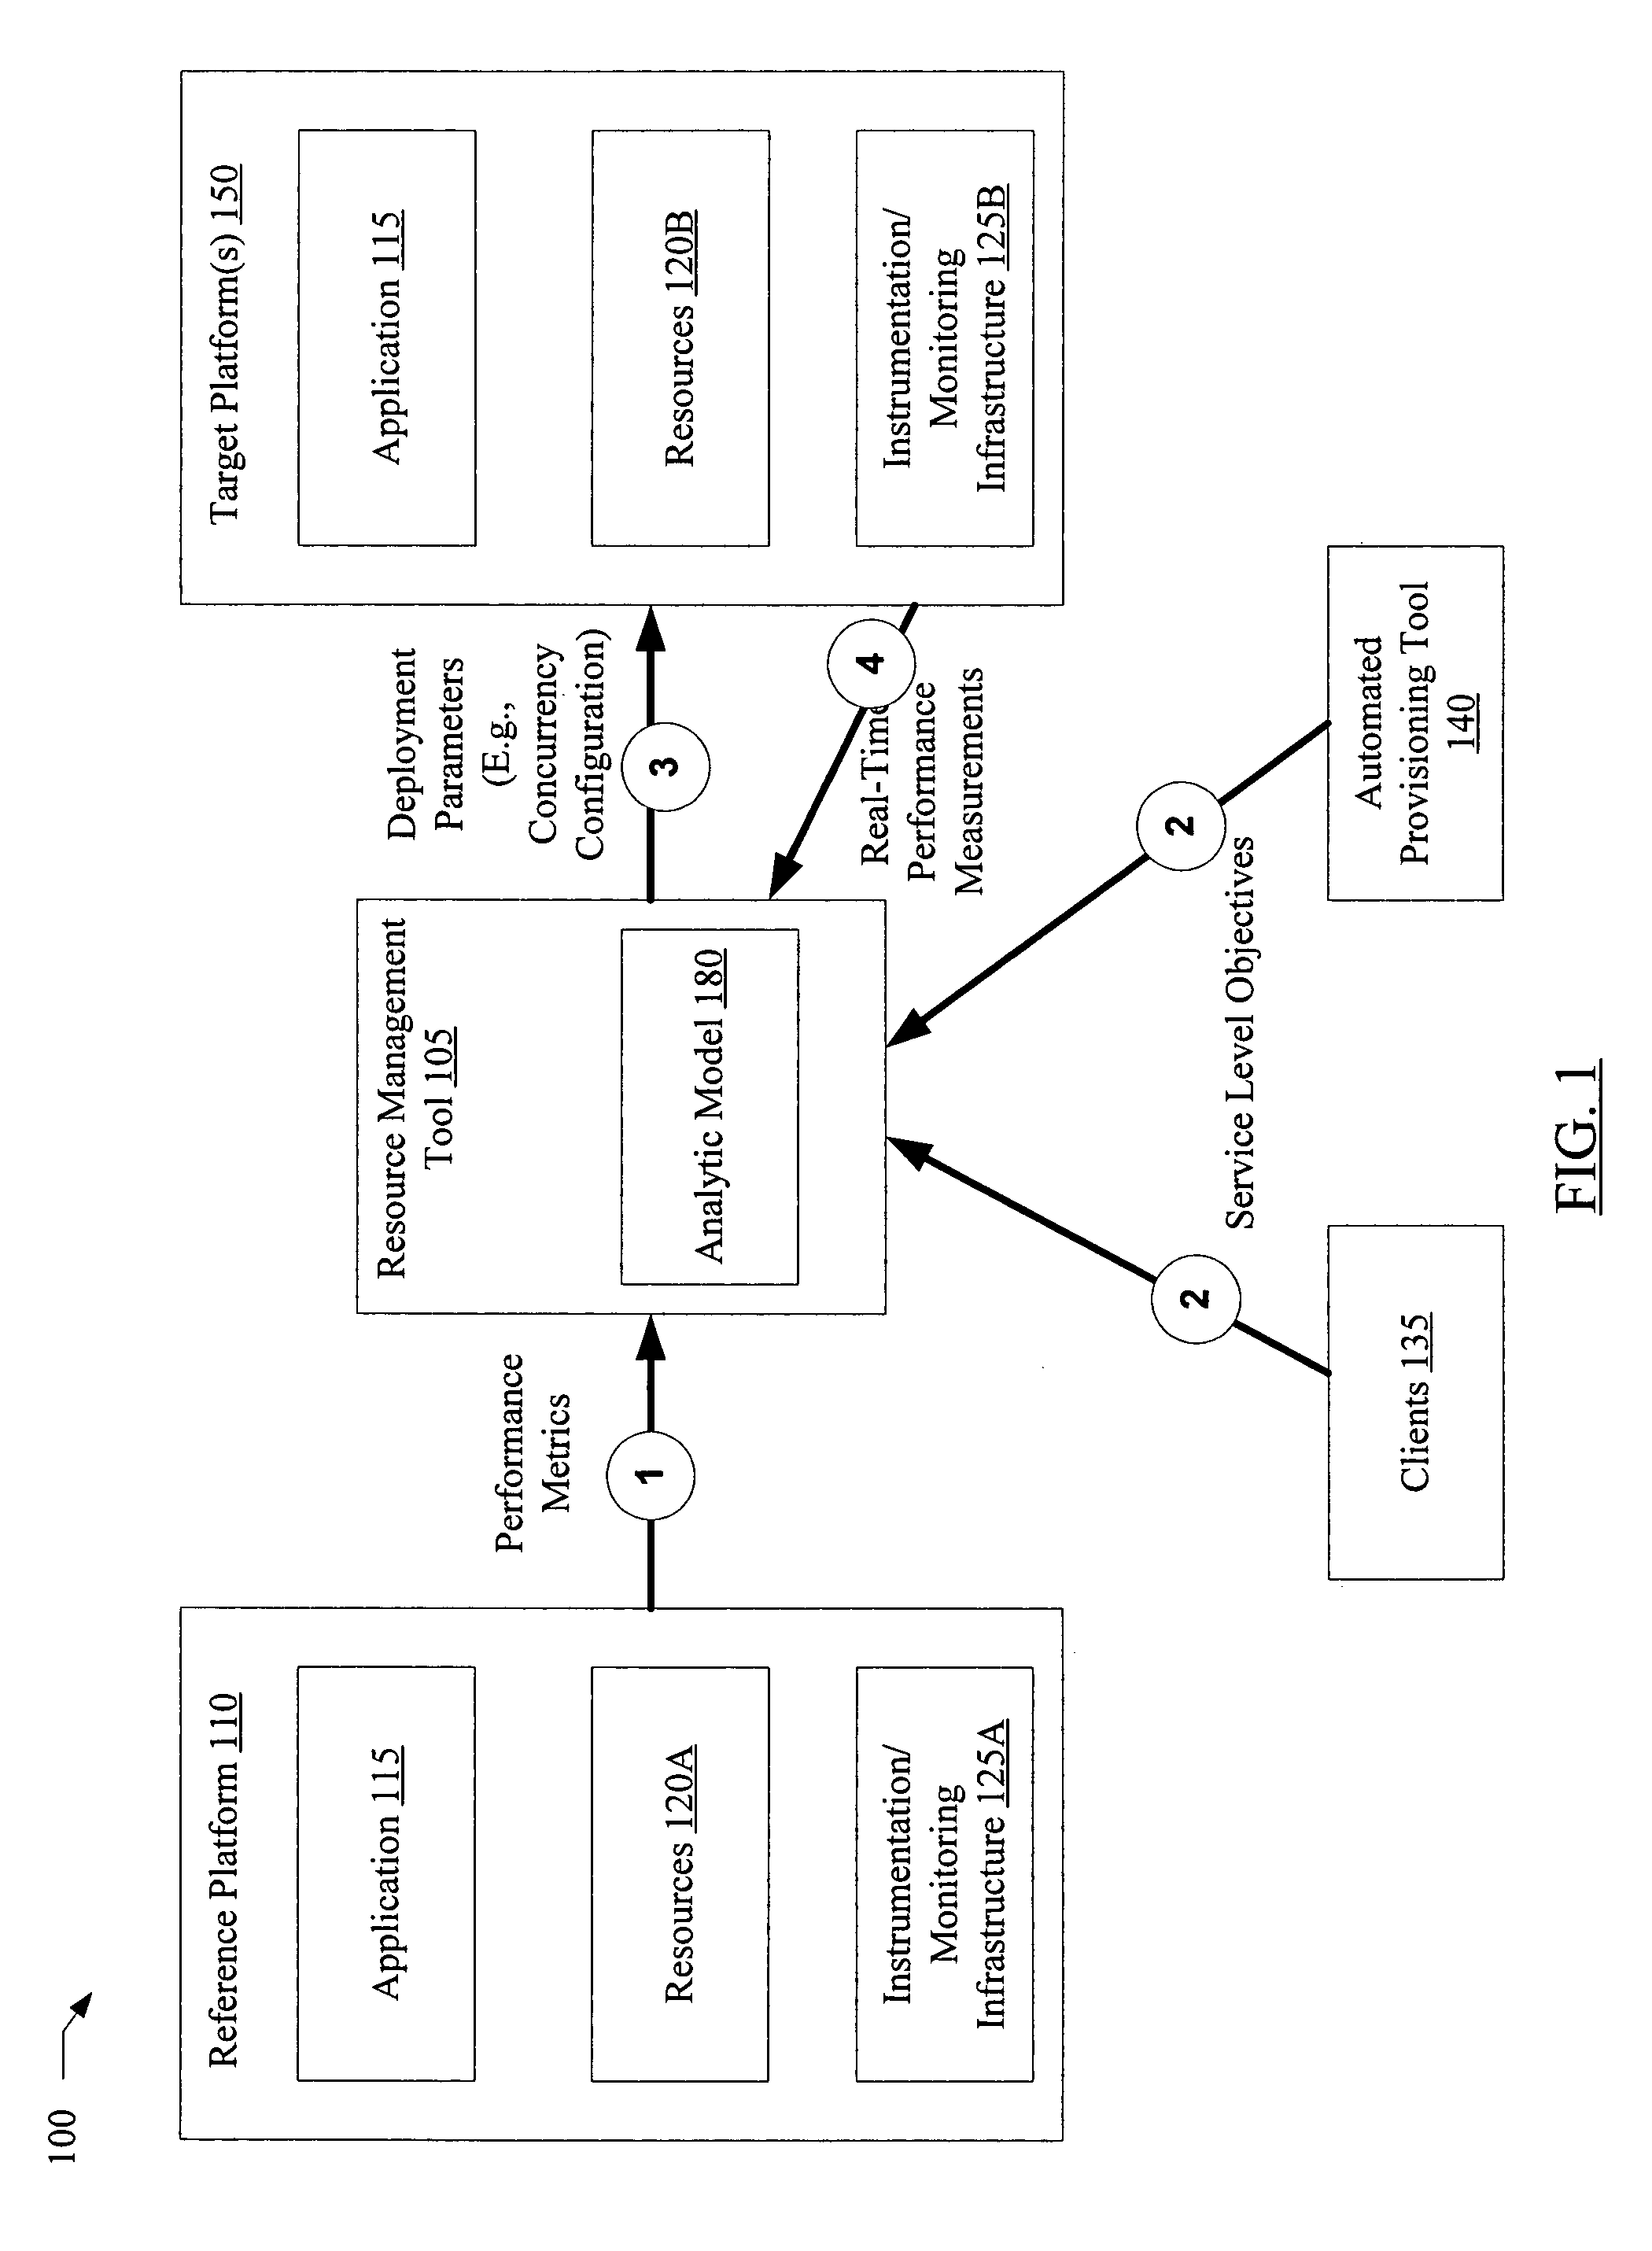 Automated concurrency configuration of multi-threaded programs